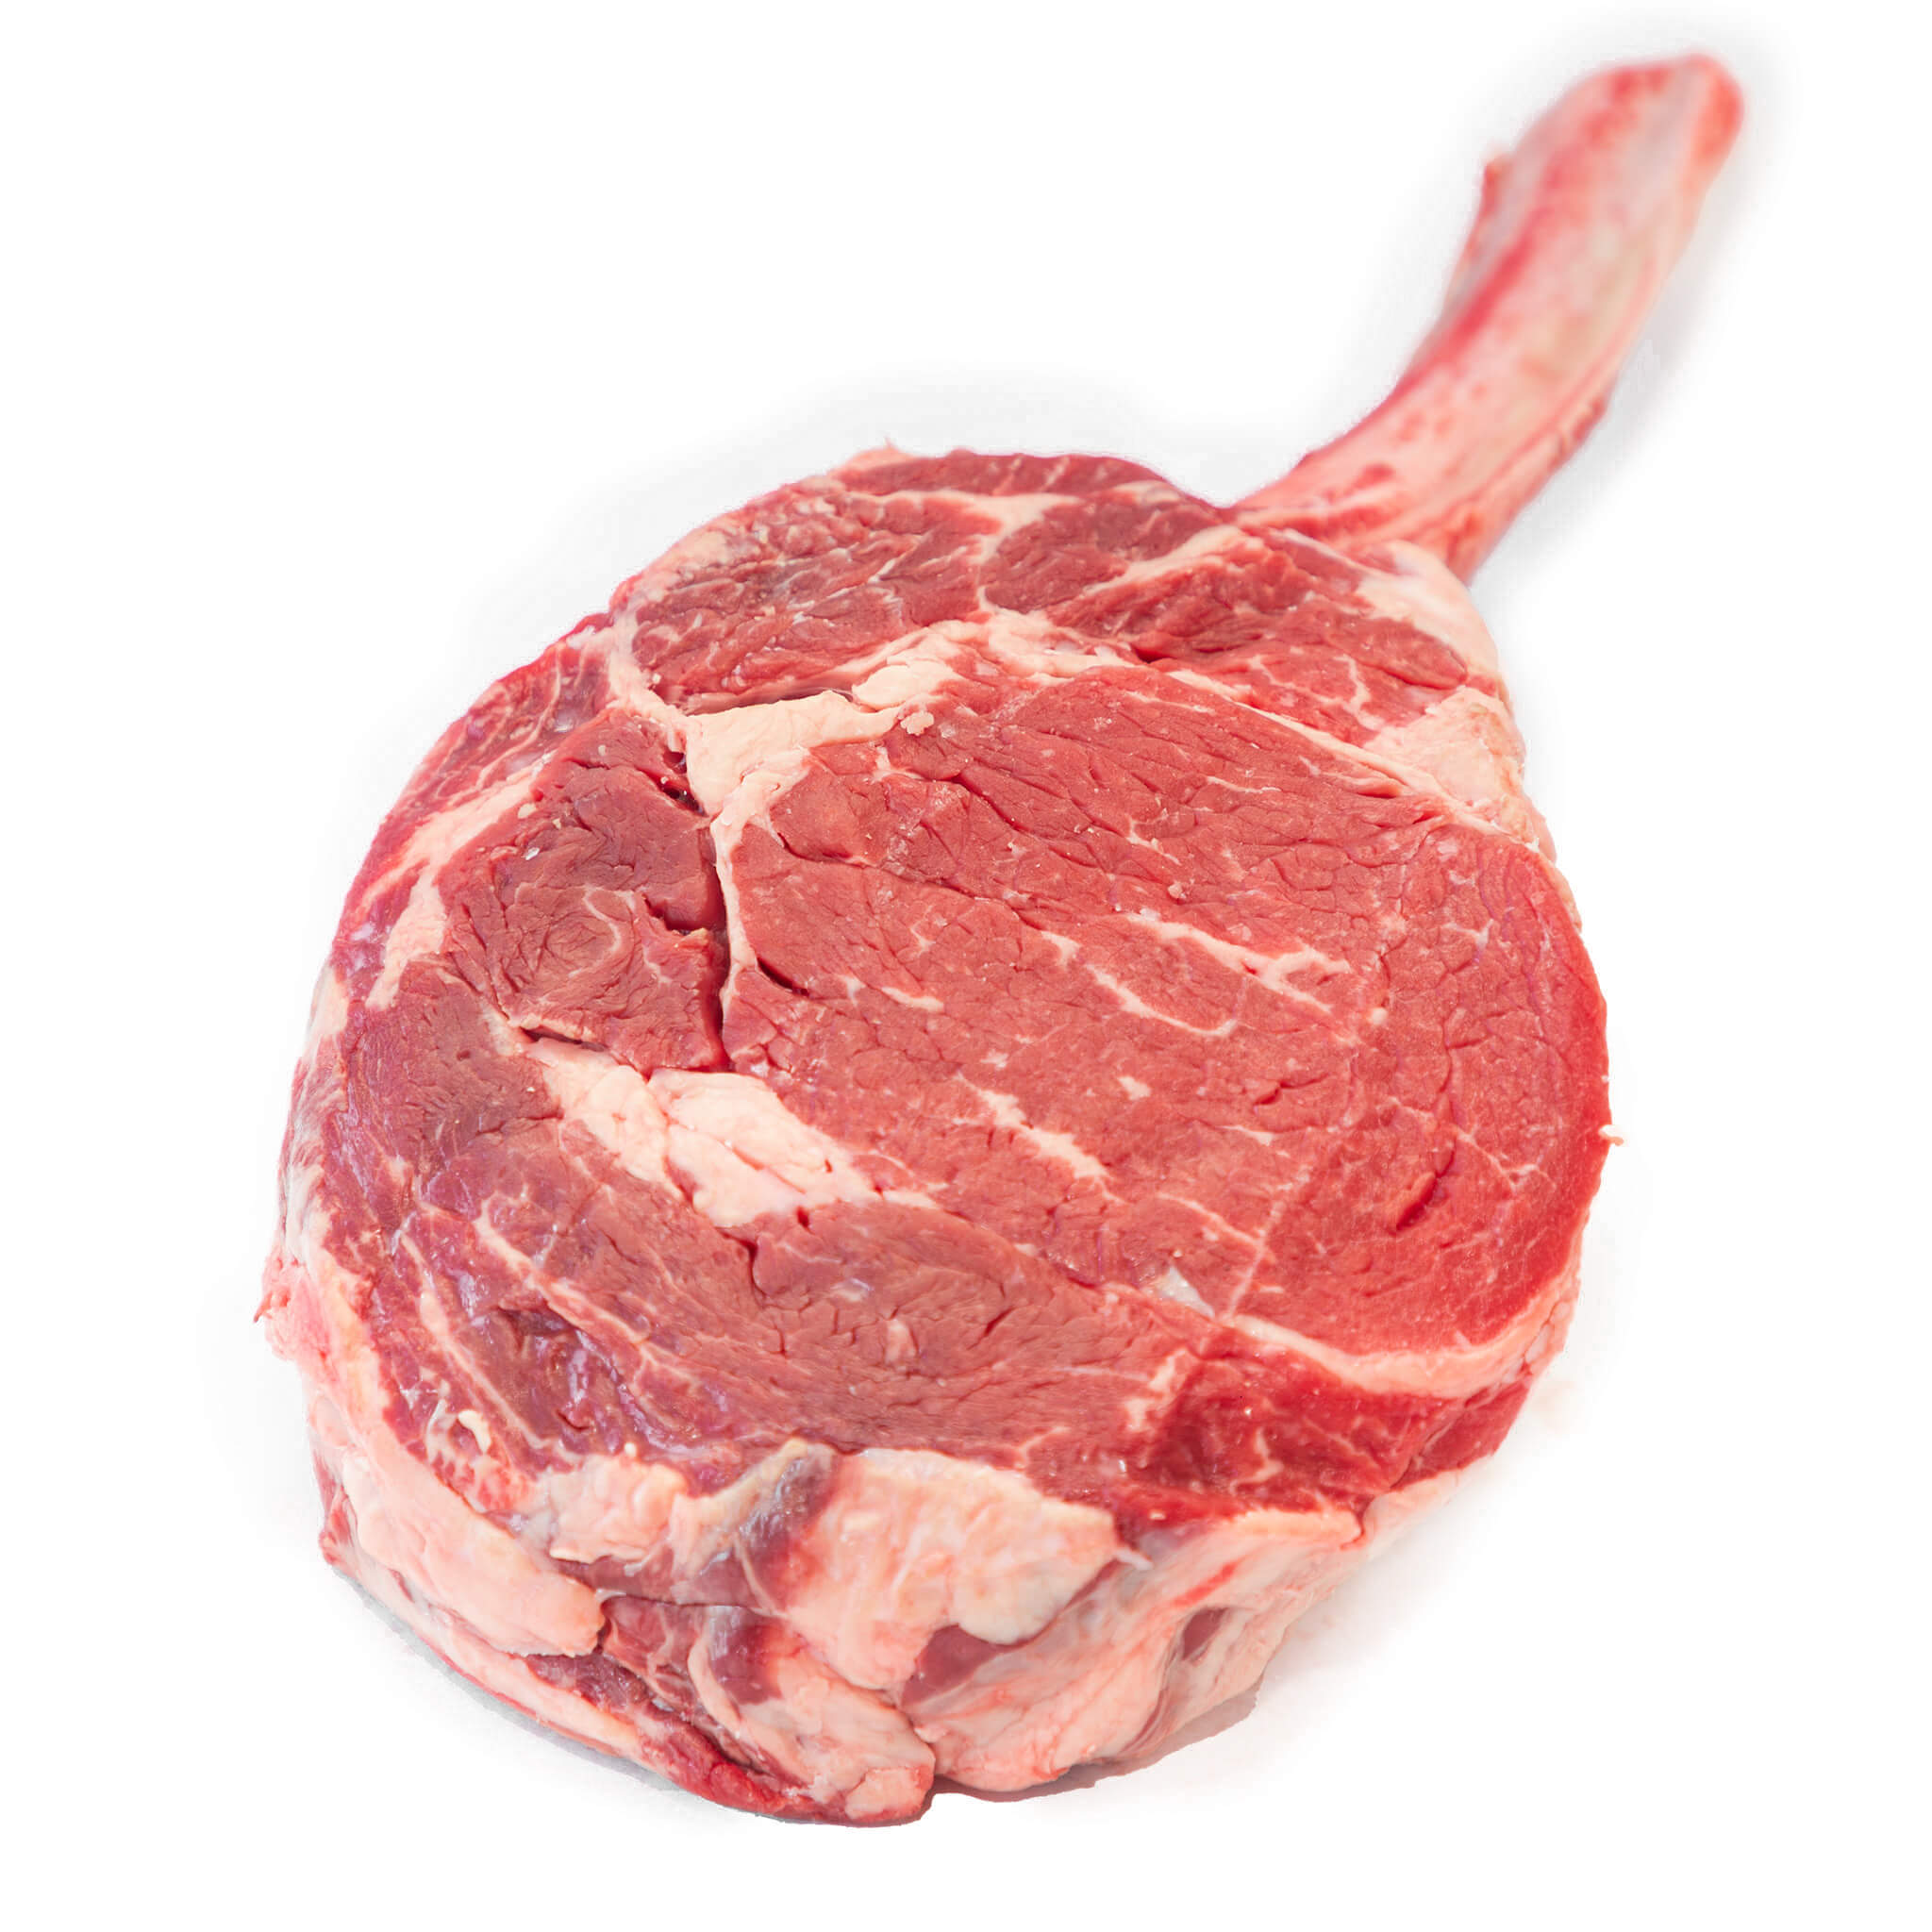 Grass fed Beef rib eye 400-500g each for delivery in Sydney From Steve Costi Seafood